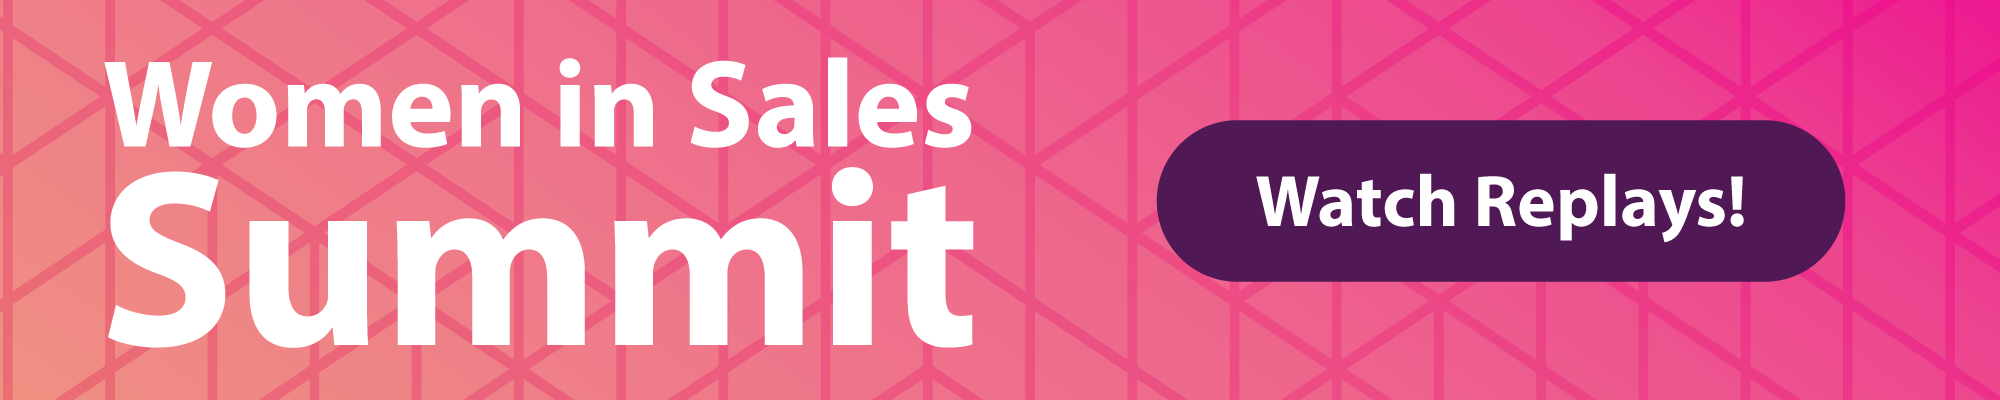 https://campaign-image.com/zohocampaigns/415064000040207008_zc_v12_1604949905915_women_in_sales_summit_watch_replays_banner.png